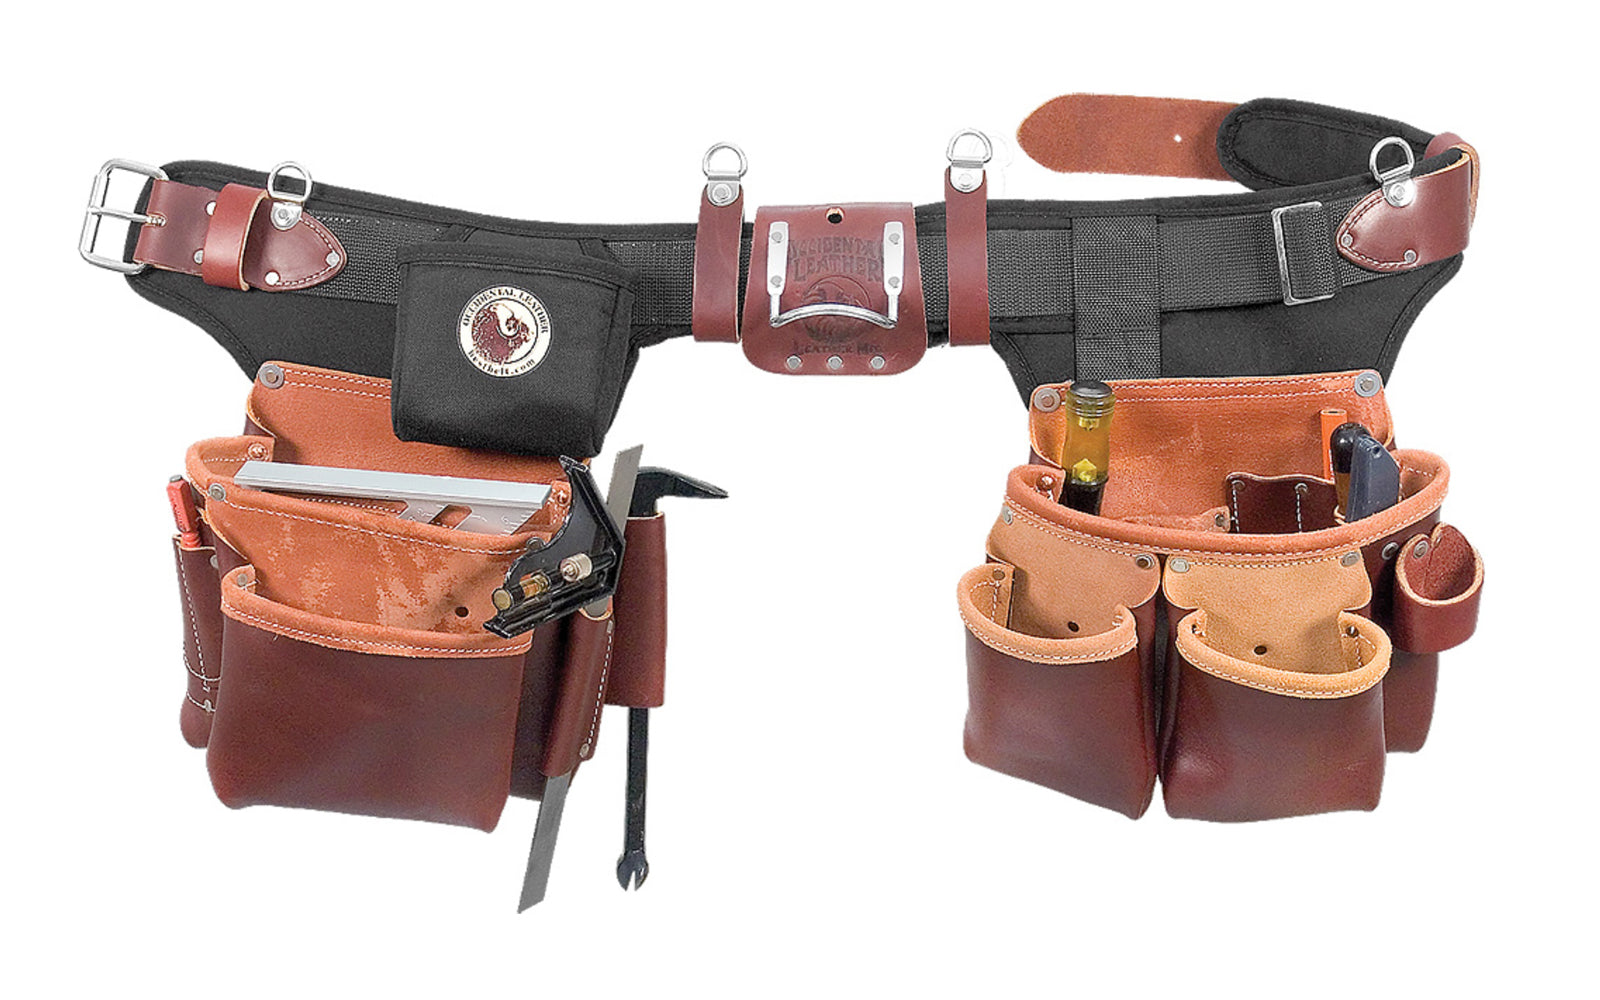 Occidental Leather Heritage "Adjust-To-Fit" Pro Framer Tool Belt Package Set ~ 9550 - Premium Top-Grain Leather bags - 21 pockets - Fully Adjustable - Contracts to 32” Pant (35” Belt), Expands to 41” Pant (45” Belt). 759244196603. Industrial Nylon material. Made in USA - Pro Framer leather framing bags - Copper Rivets